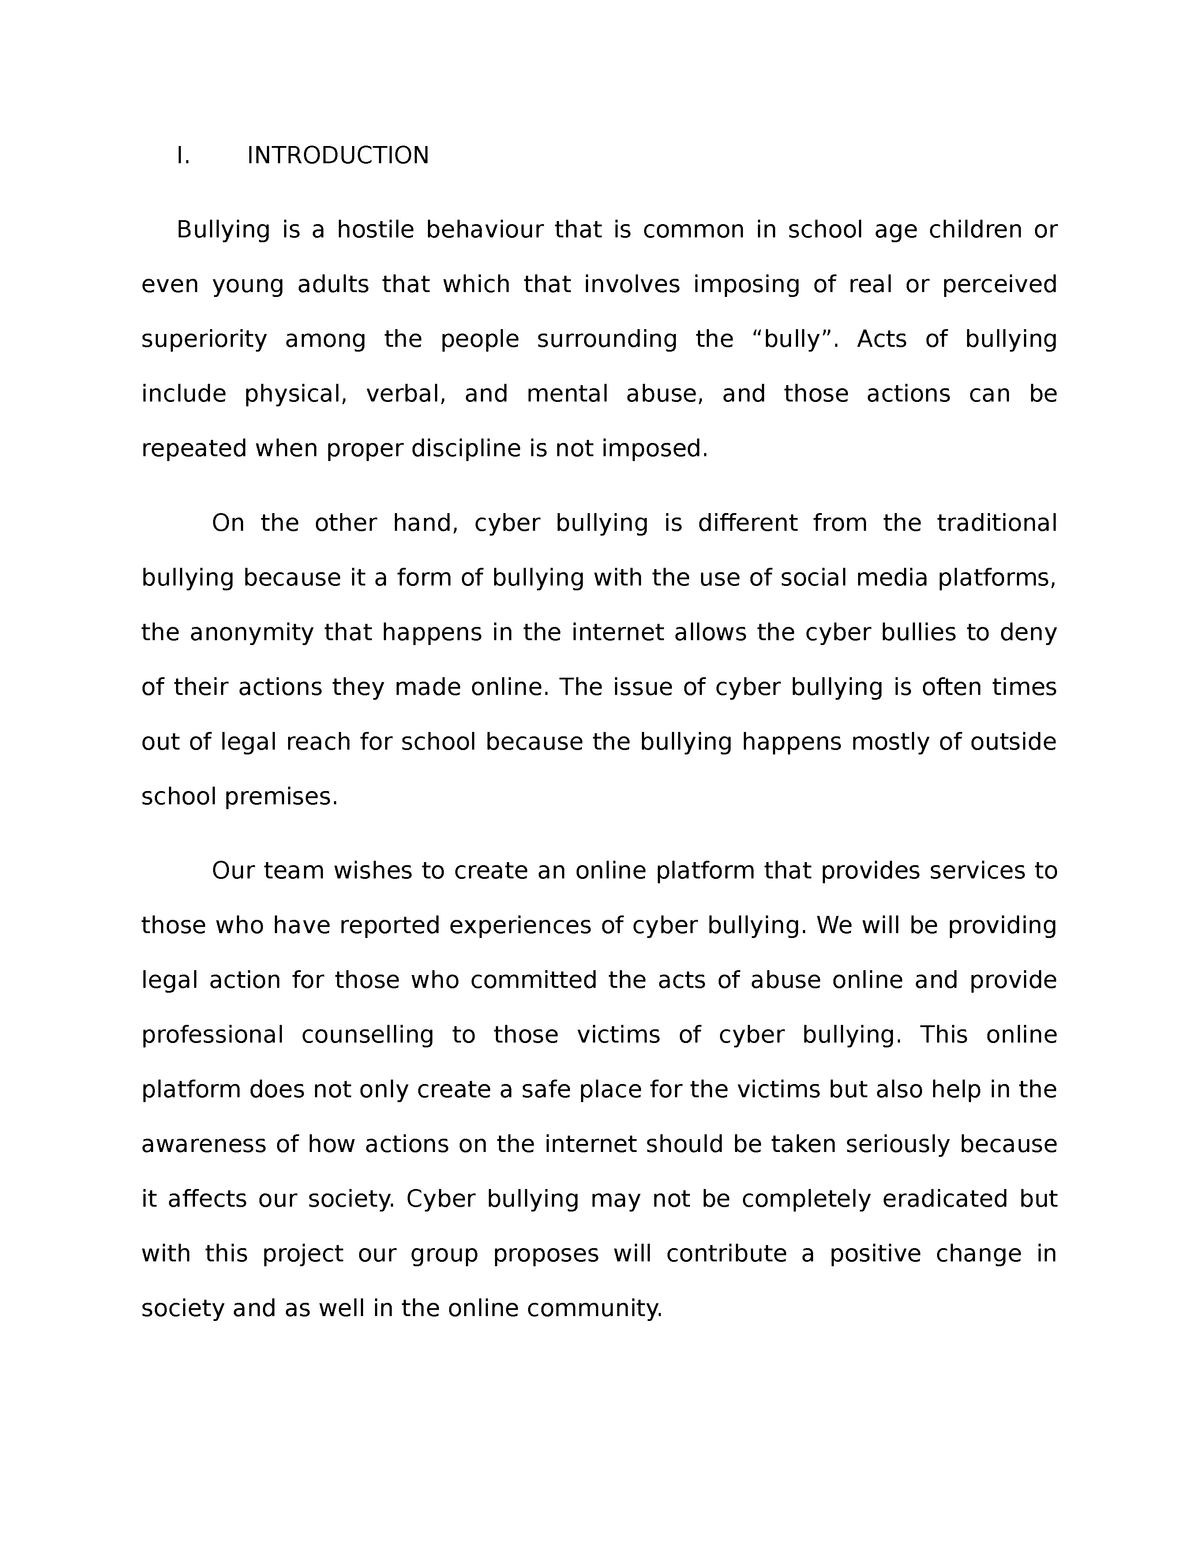 introduction sample for research paper about bullying